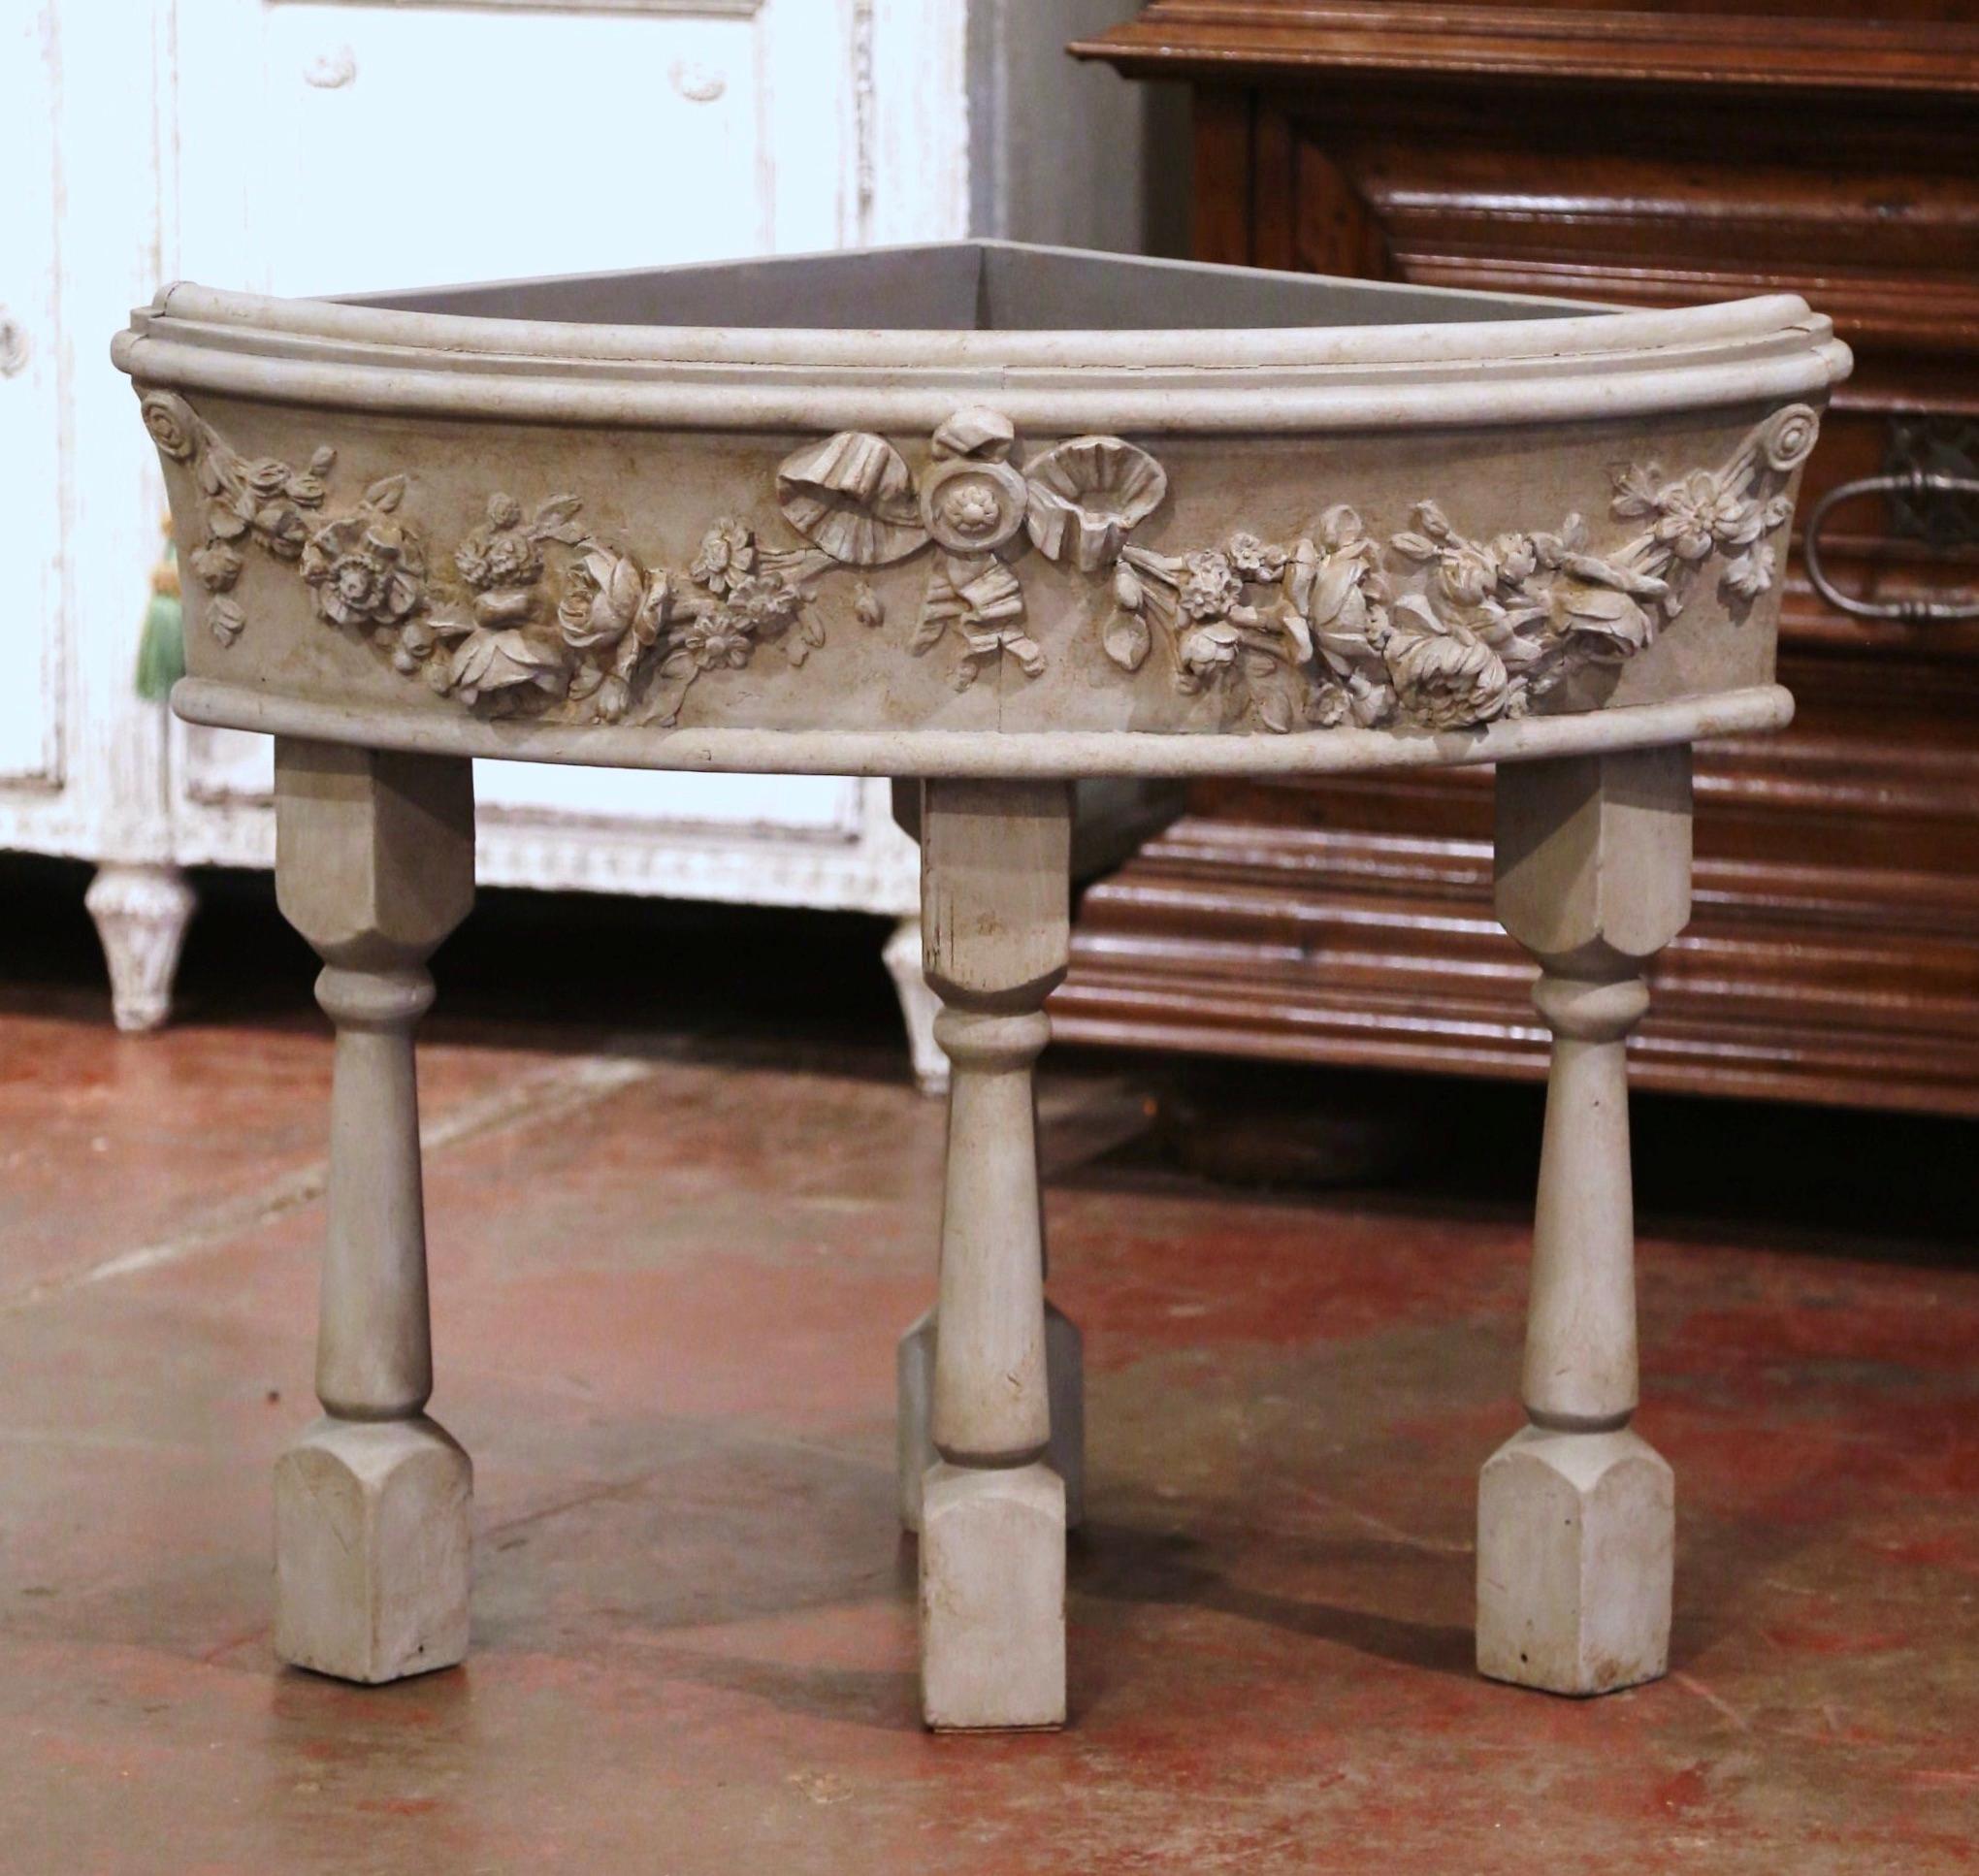 Hand-Painted 18th Century French Louis XVI Carved and Painted Bowed Corner Planter on Stand